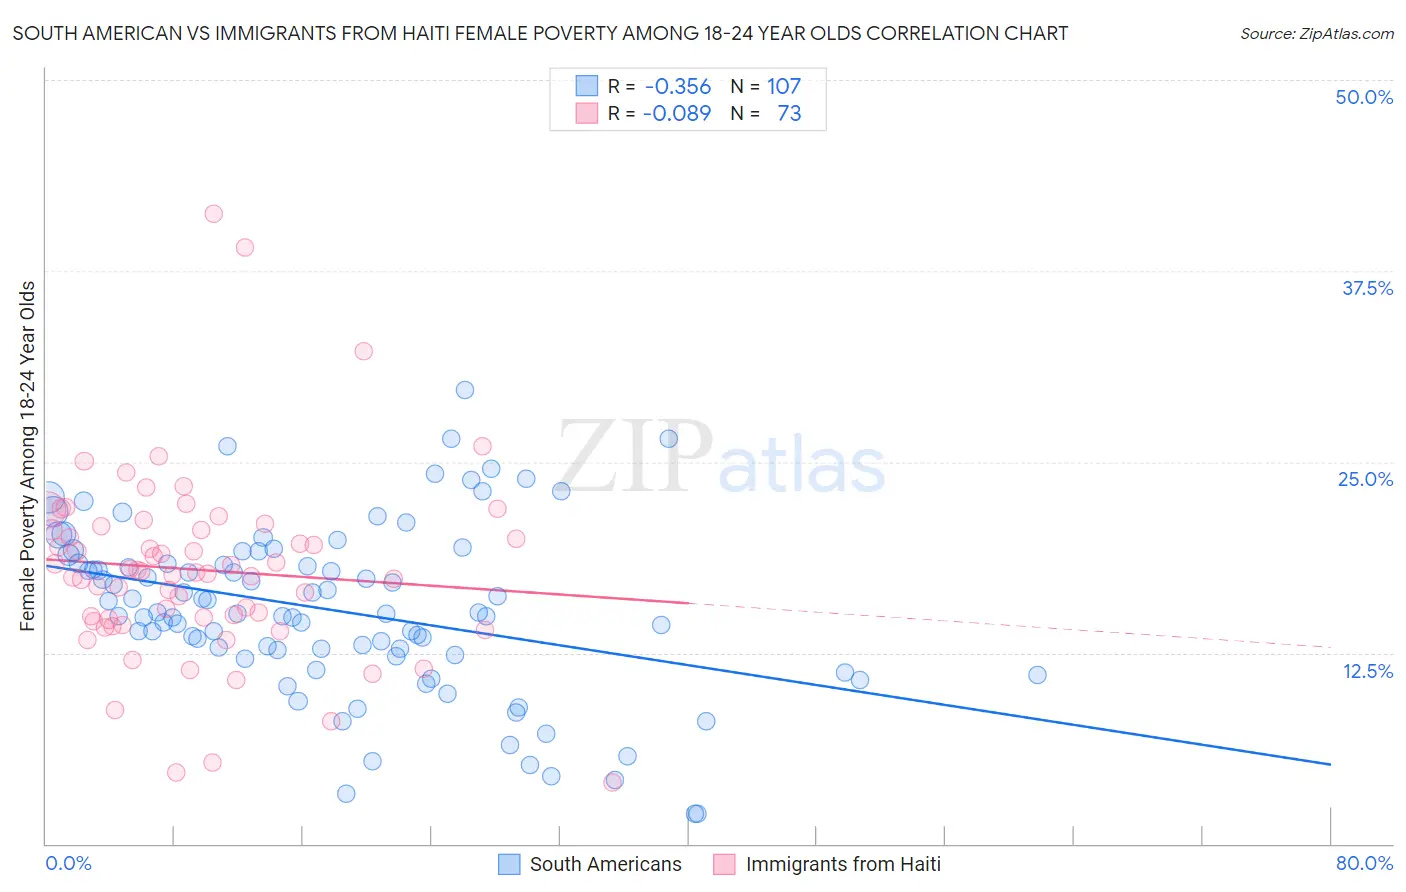 South American vs Immigrants from Haiti Female Poverty Among 18-24 Year Olds